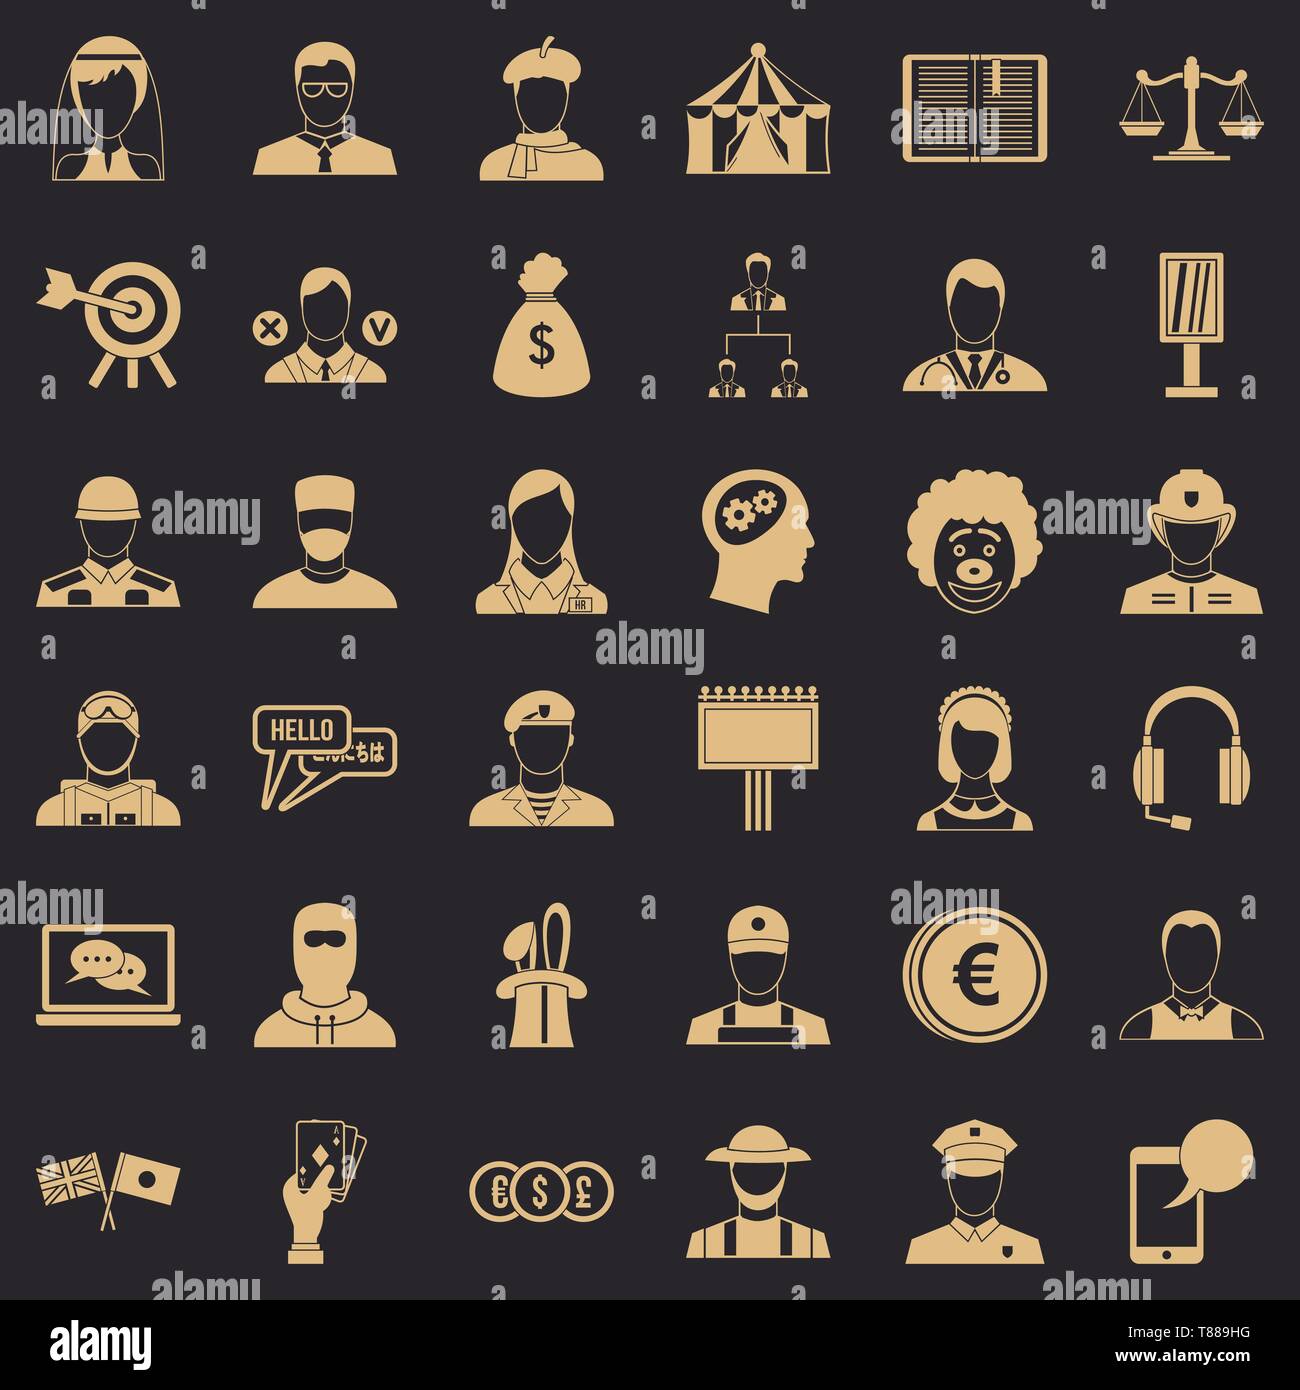 Robbery icons set, simple style Stock Vector